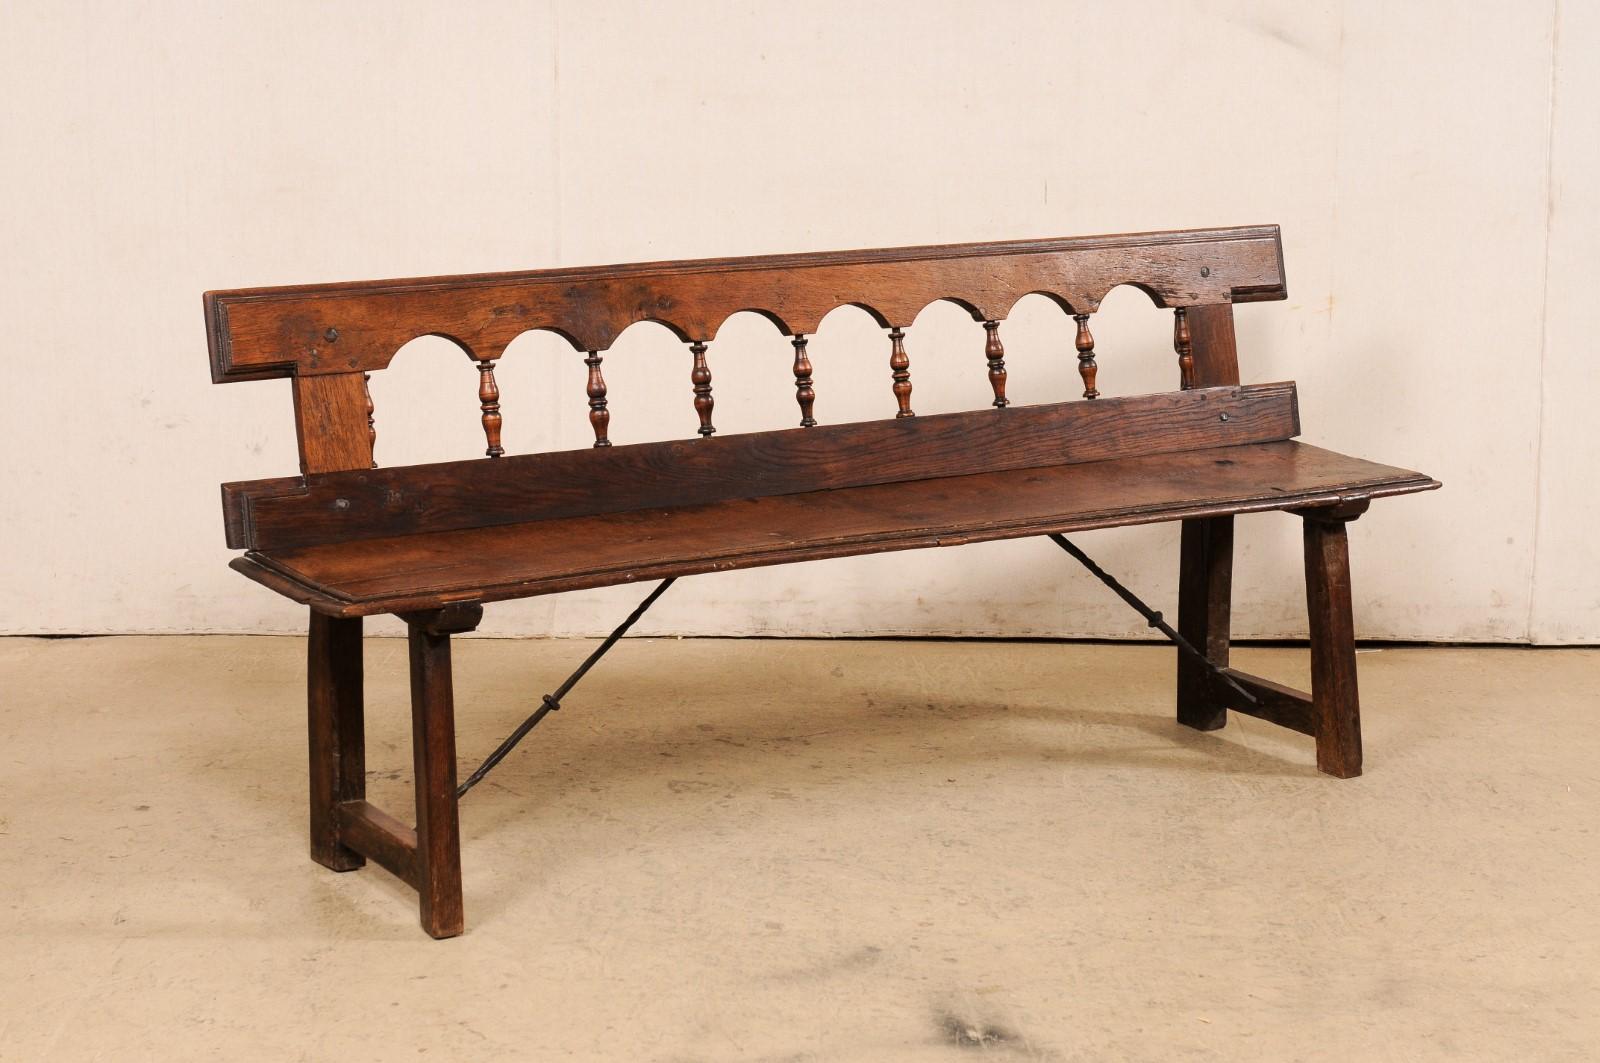 A Spanish carved-wood bench, with trestle-legs and iron stretchers, from the 19th century. This antique wooden bench from Spain features a back rest carved in a repeating open arch motif with spindle back-splats and straight-edge top rail. The sides